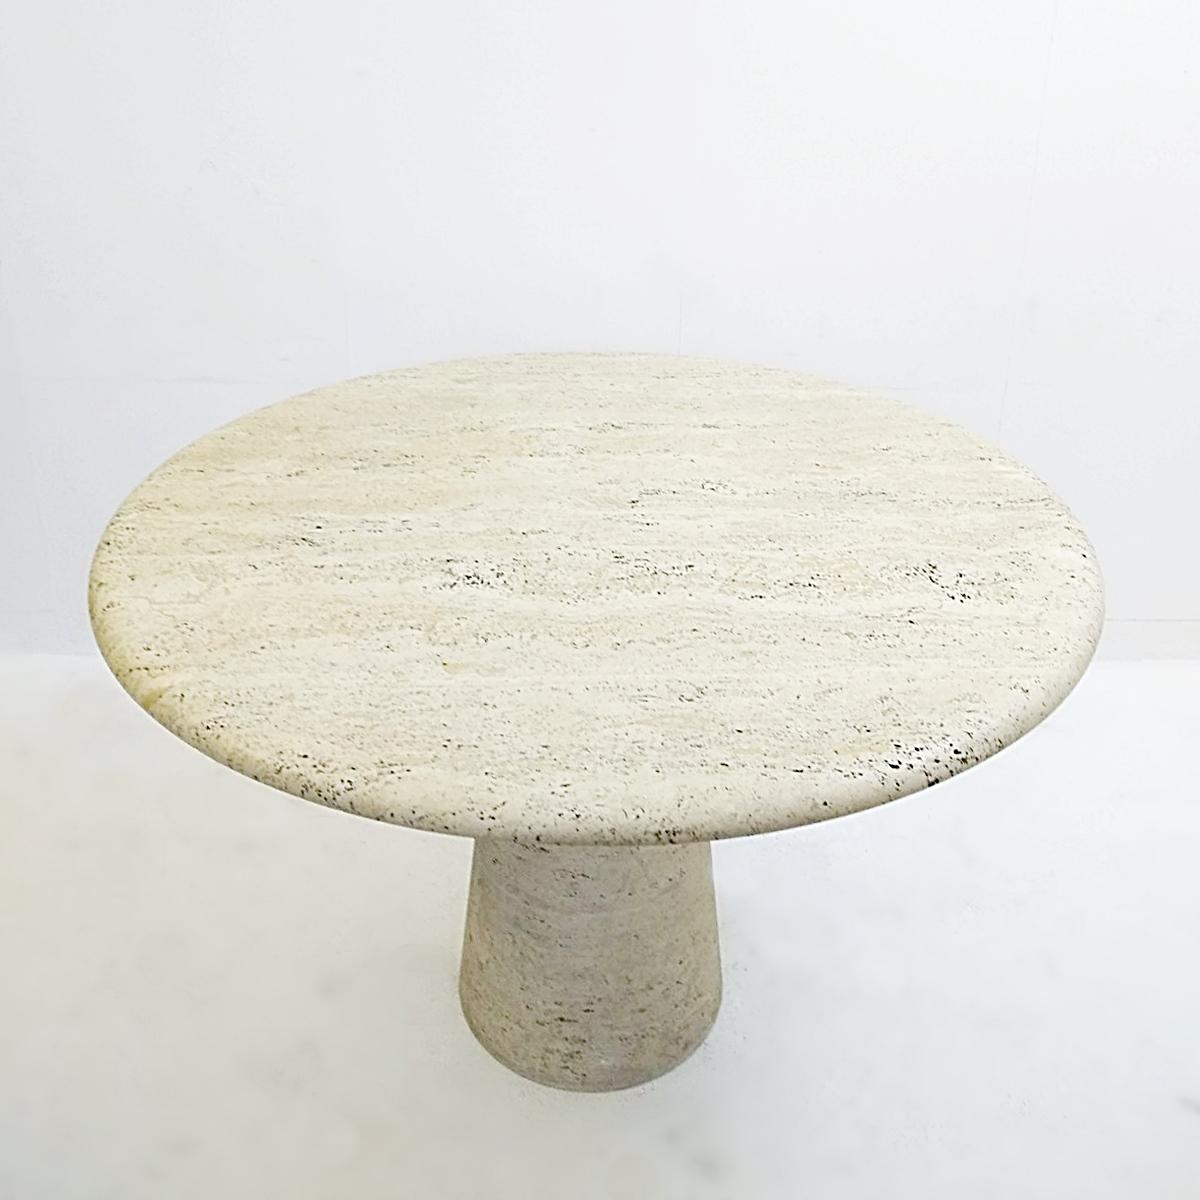 Dining pedestal table in travertine, Italy 1970s.